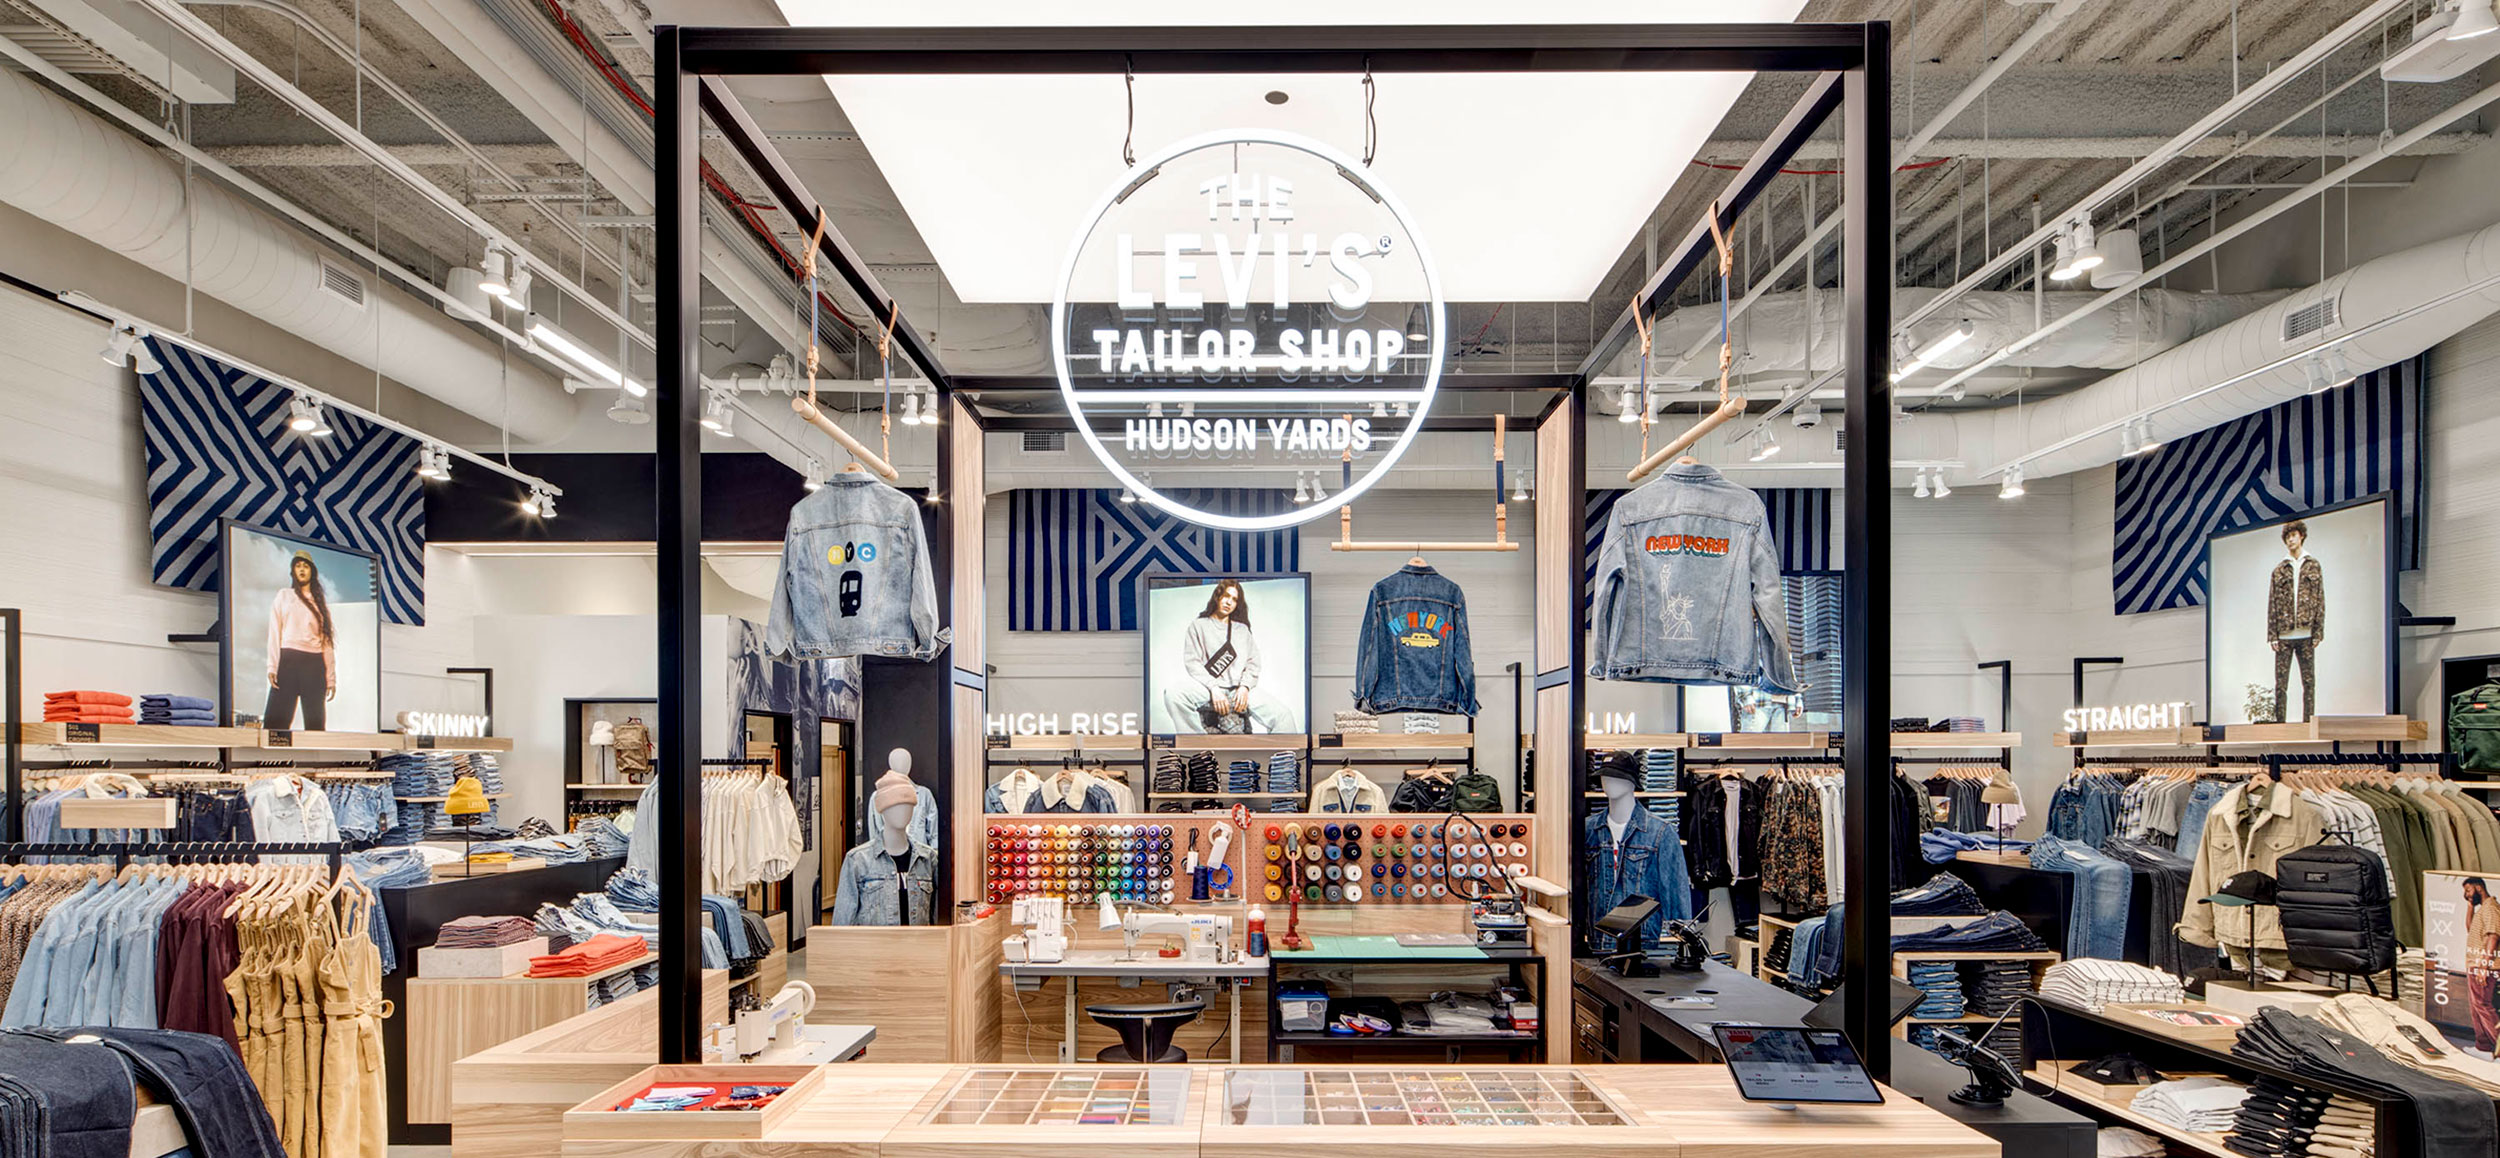 Stor Hong Kong Ærlig Tailored for the Next Generation – Visual Merchandising and Store Design